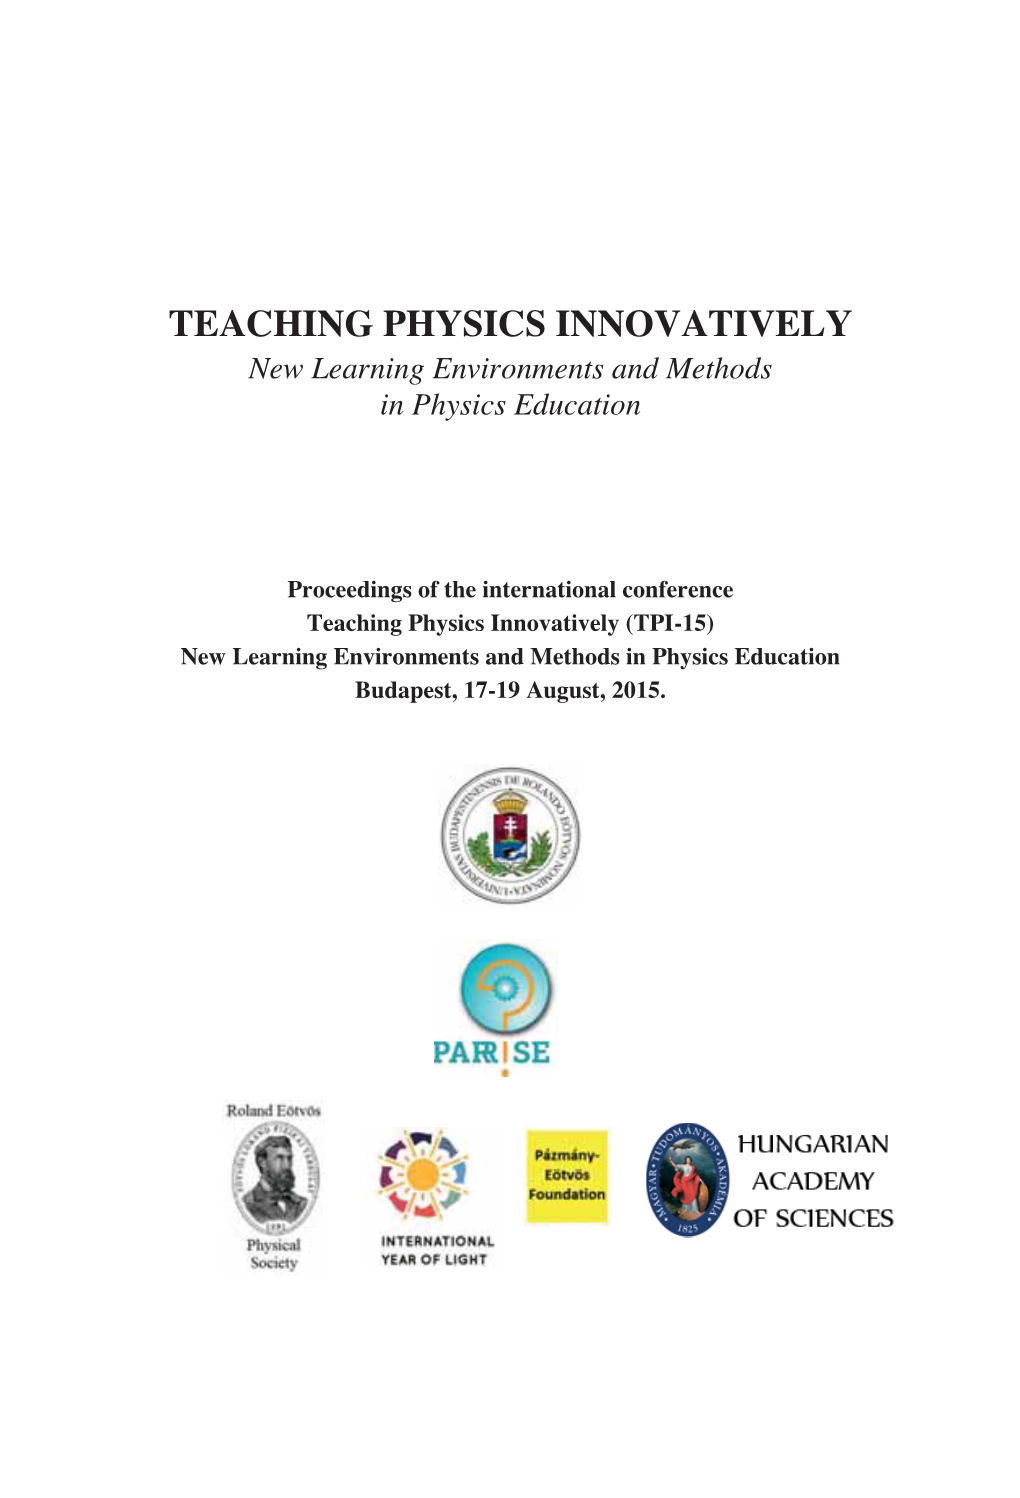 TEACHING PHYSICS INNOVATIVELY New Learning Environments and Methods in Physics Education